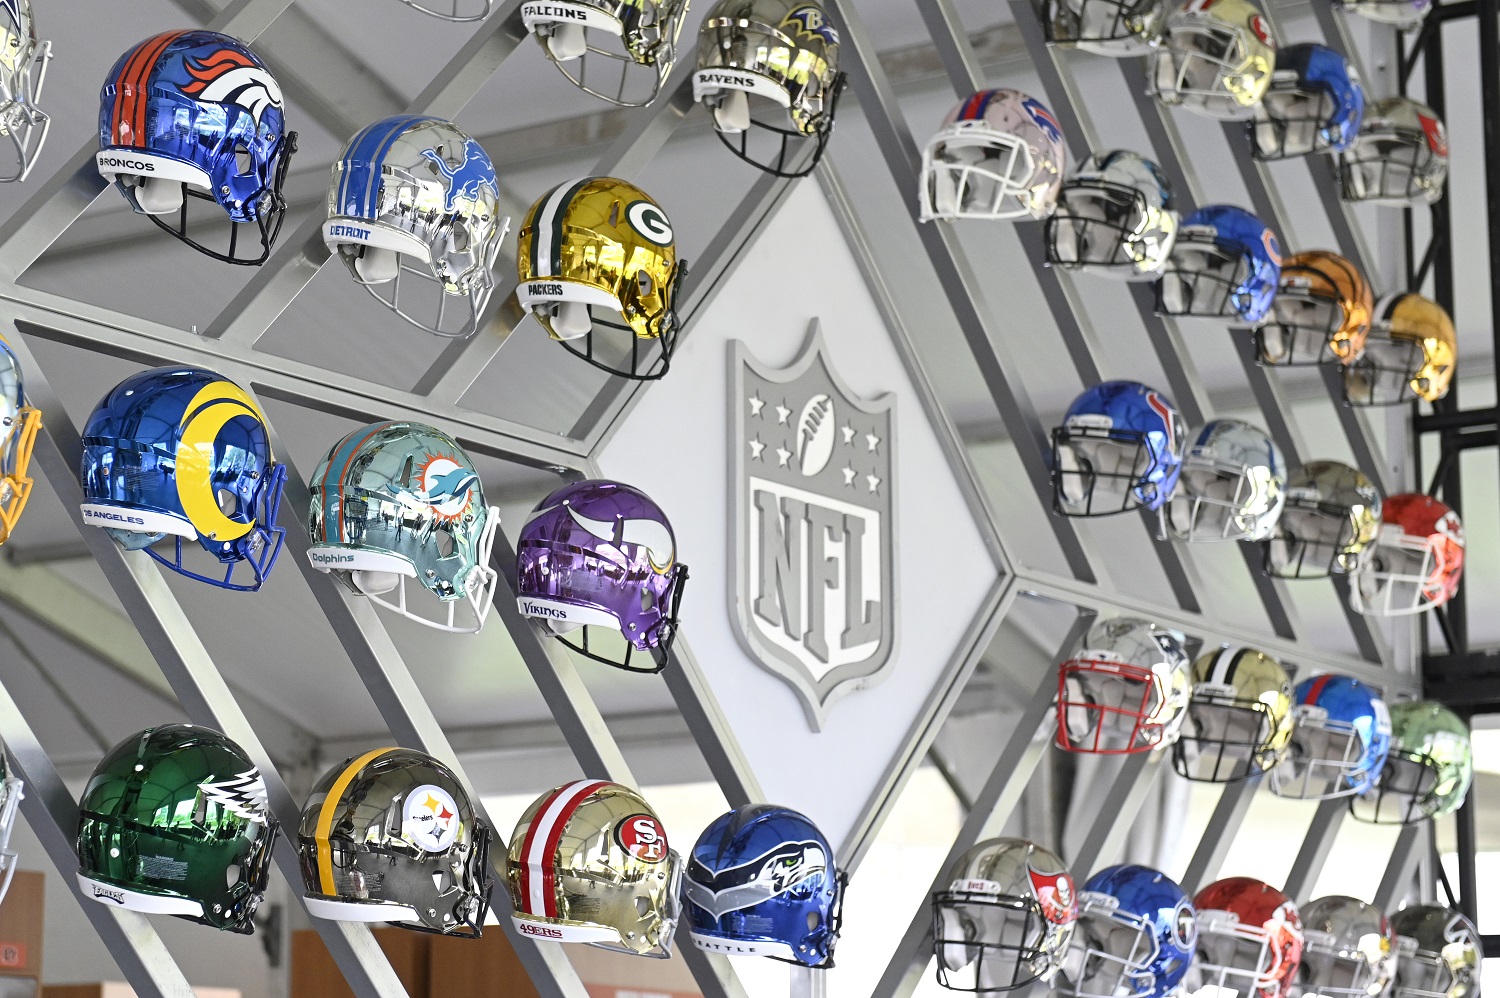 The Wall of NFL team helmets on display inside the NFL Draft Experience in Cleveland. | Duane Prokop/Getty Images